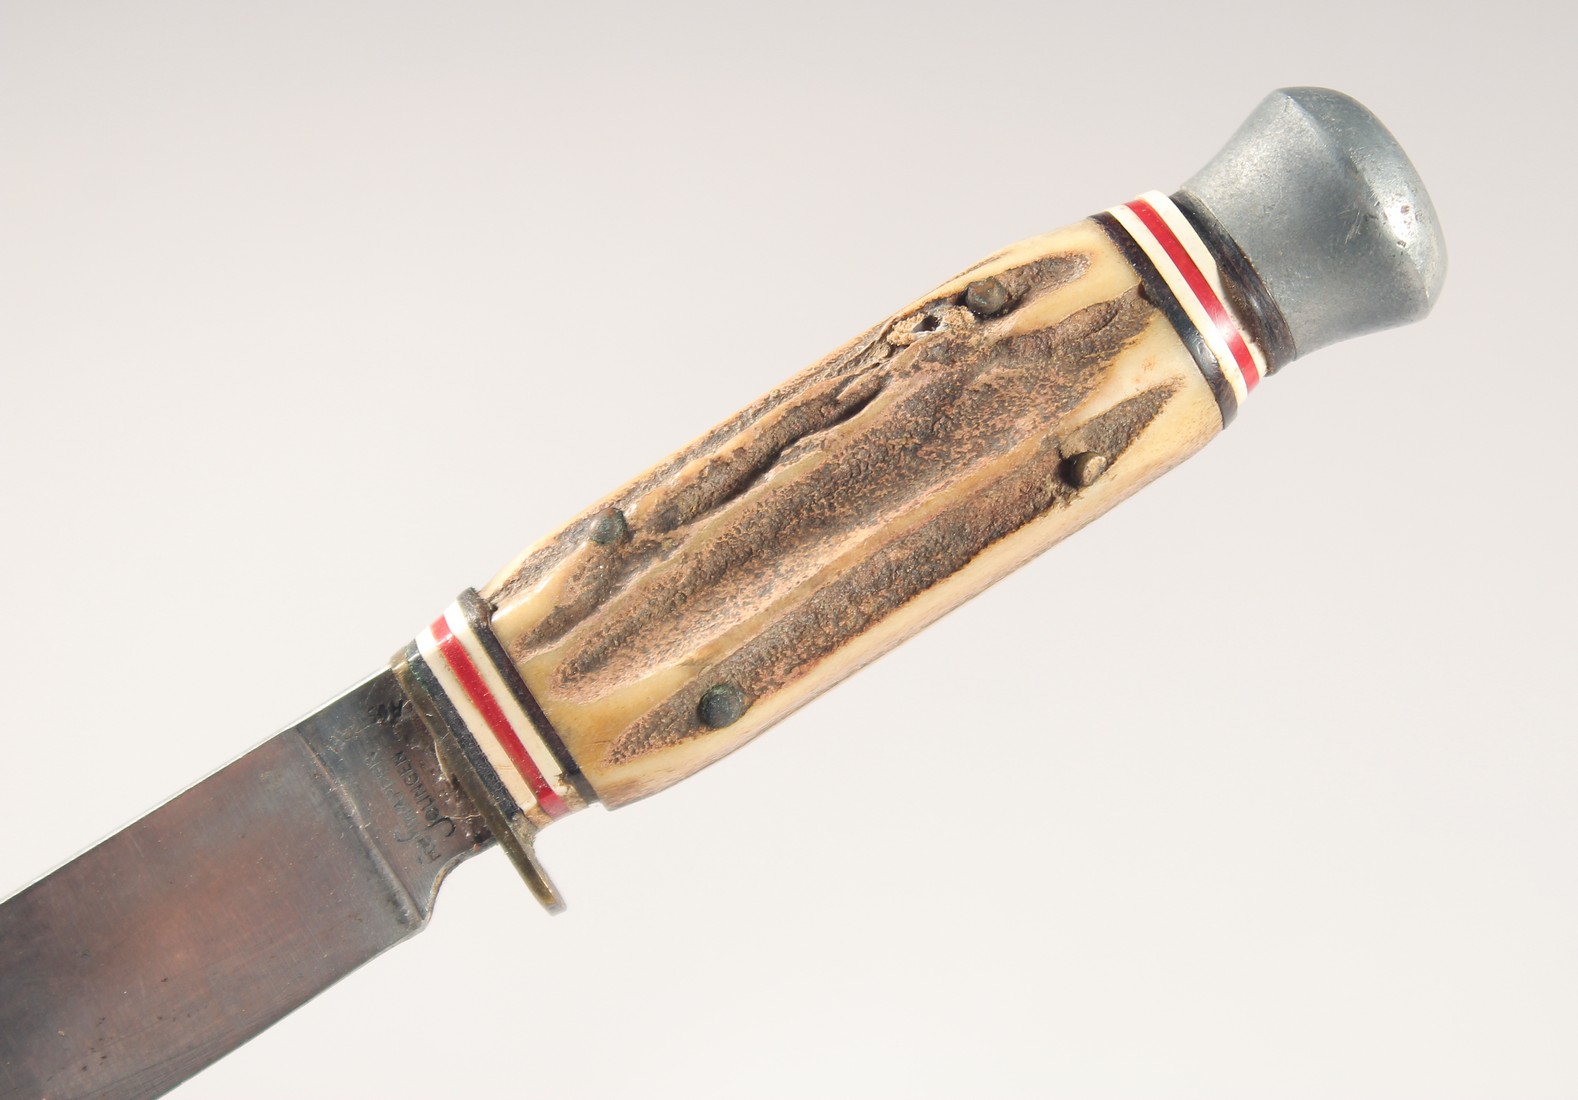 A KINFE, with antler handle carved with a rabbit, REFWAPPEN SOLINGEN, 7.5" long, in a leather - Image 3 of 5